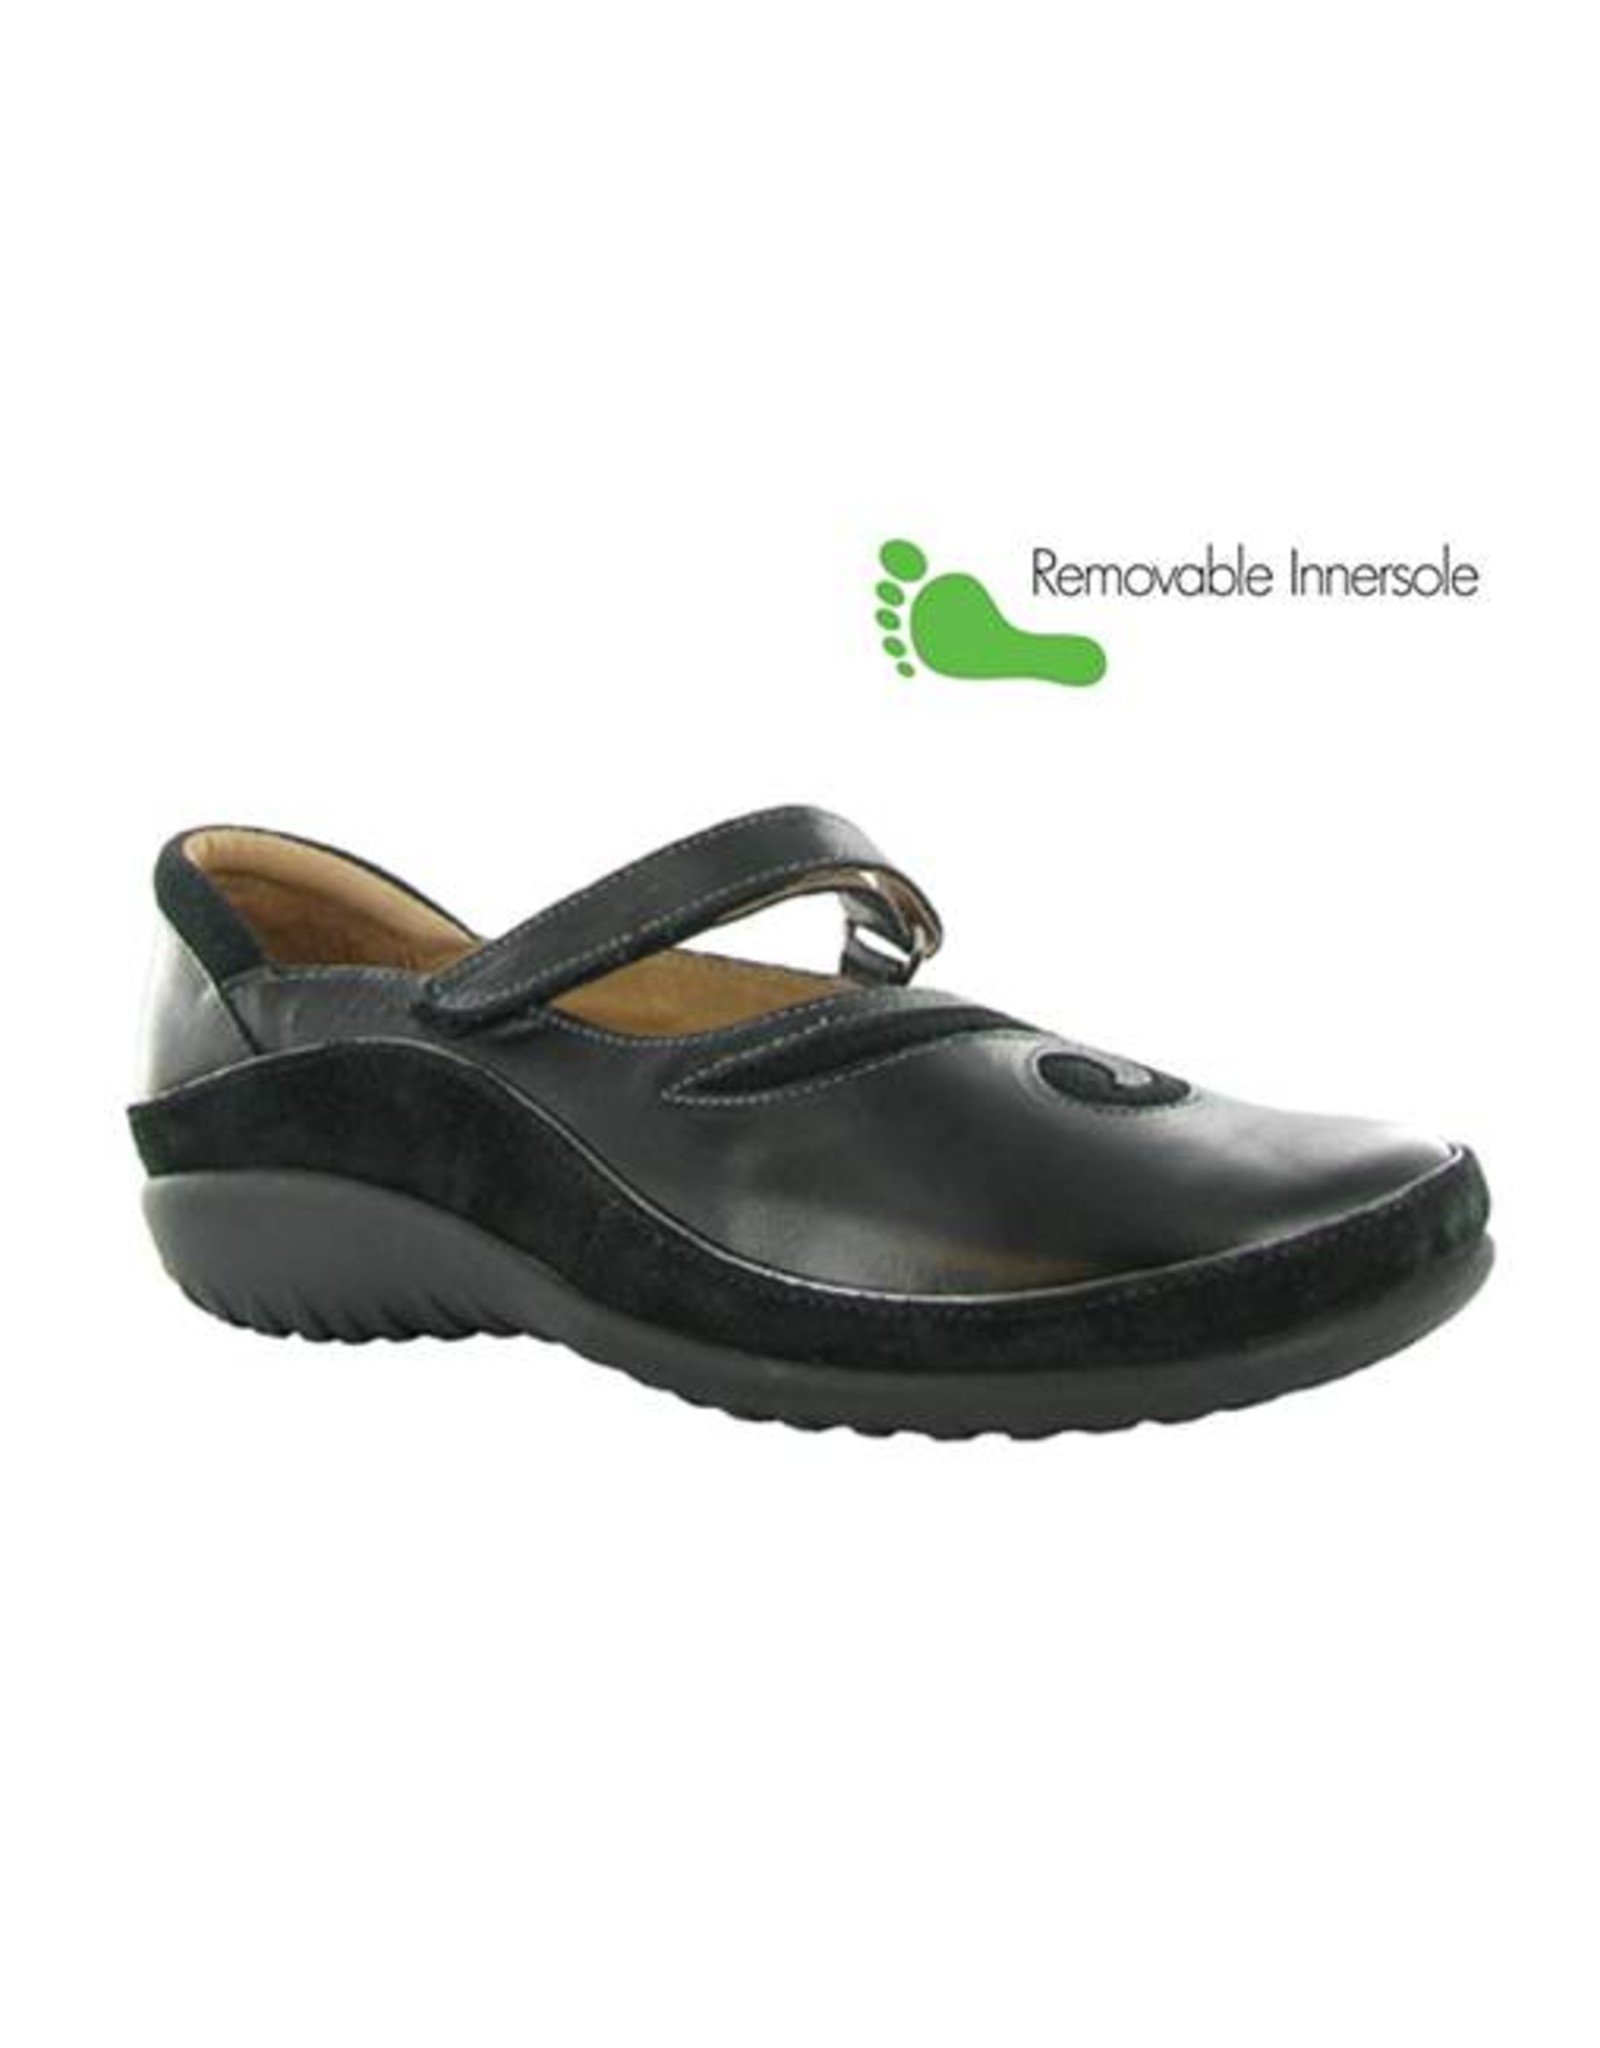 Naot Matai Leather Shoes in Black 